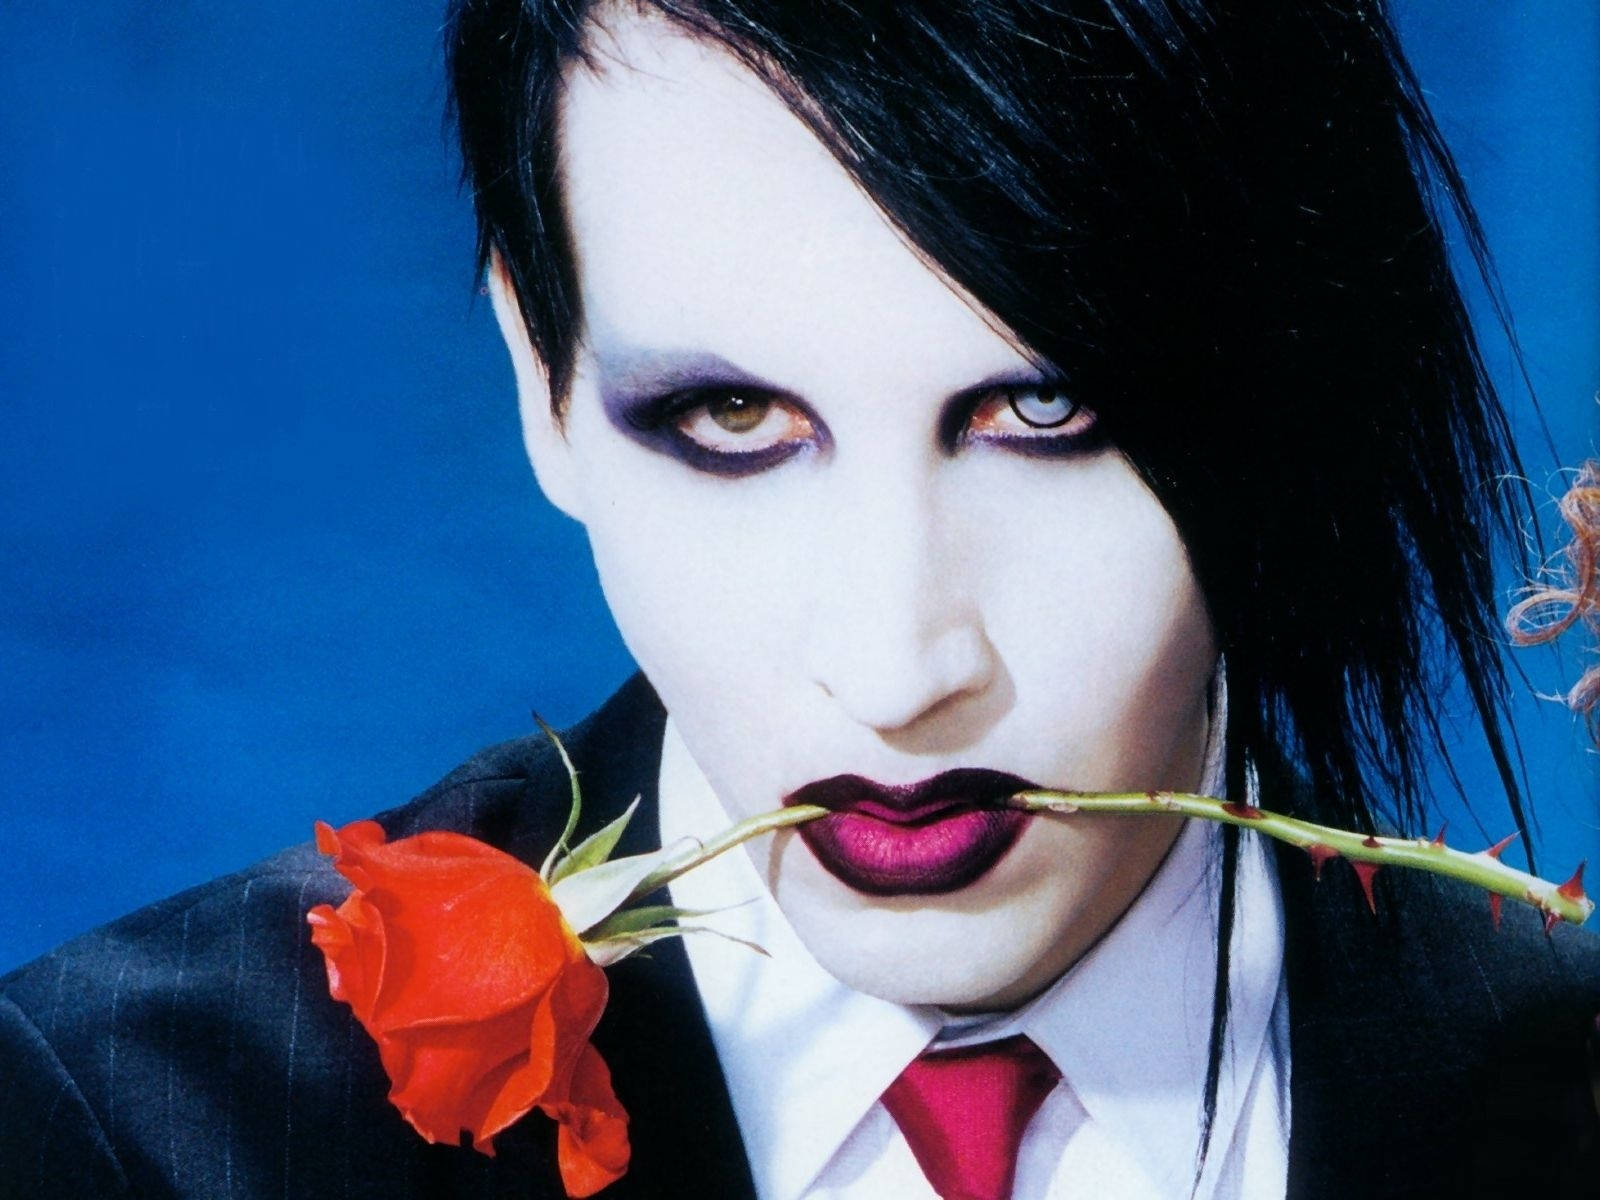 “marilyn Manson Displaying His Iconic Look And Style”